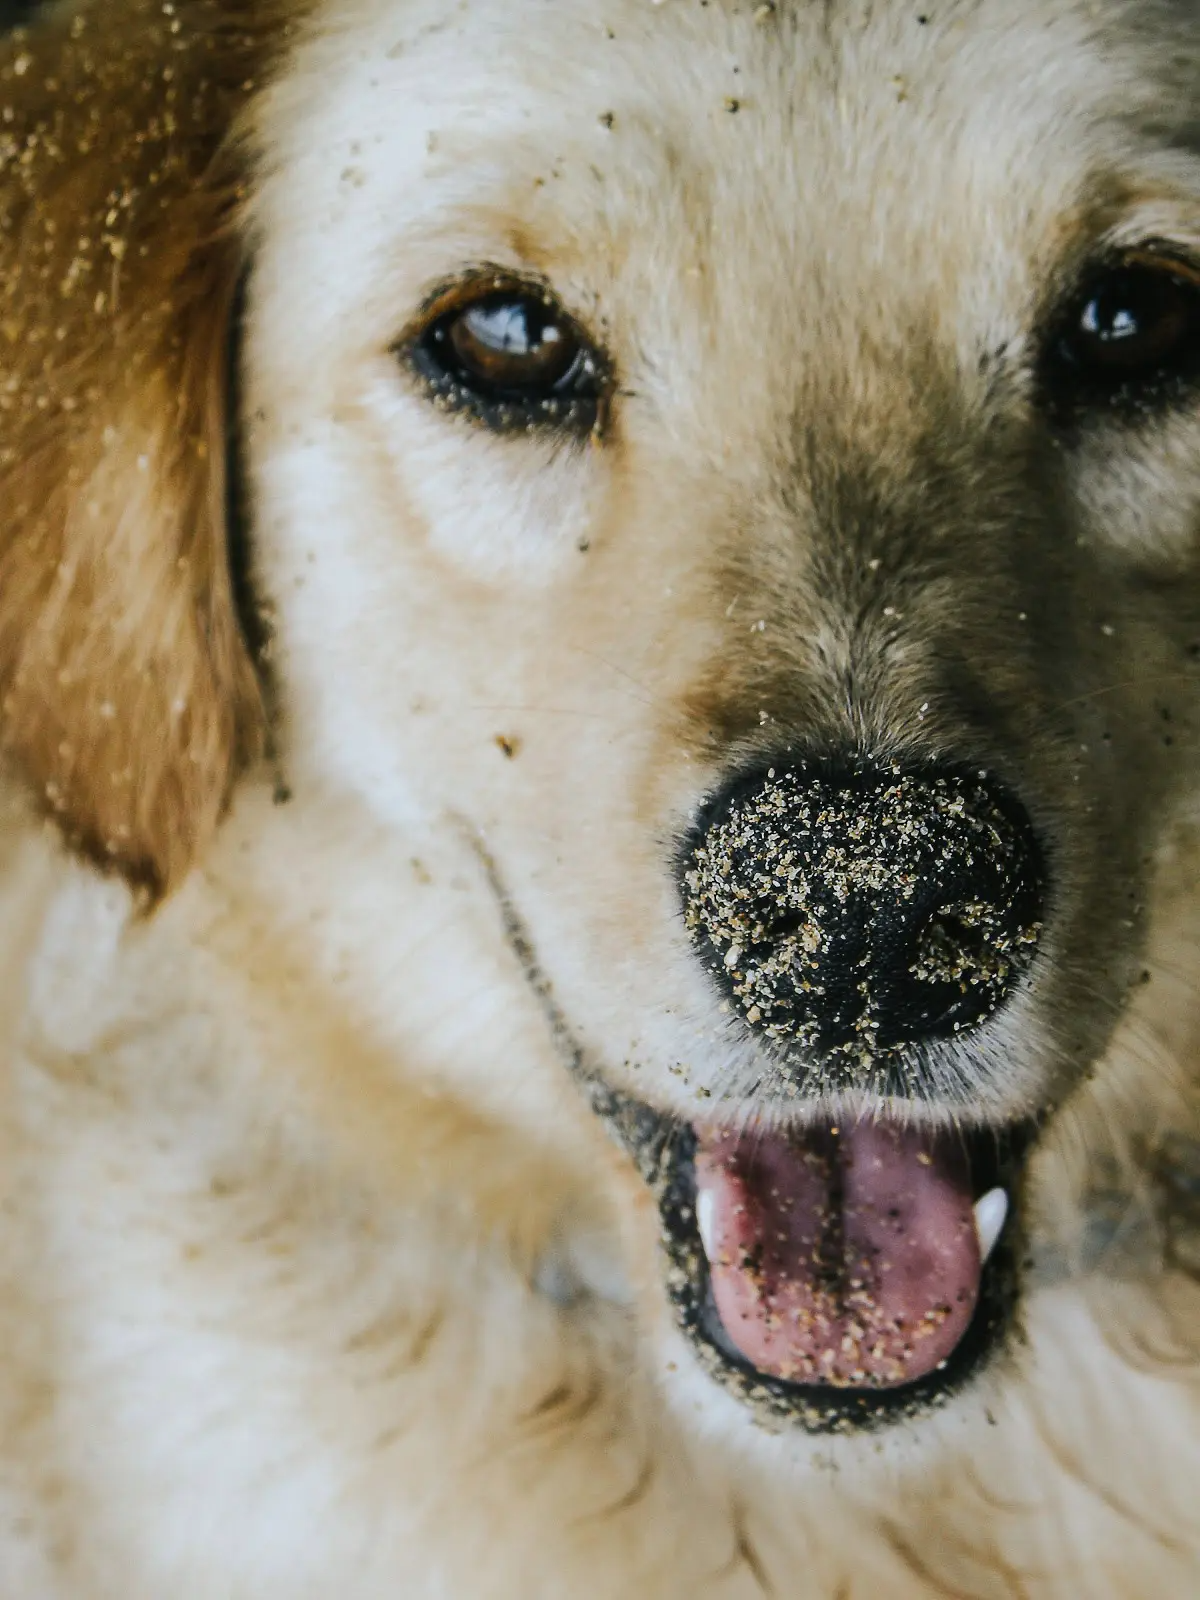 For Furry Friends: 6 Common Pet Issues That P.A.W.S Tackles